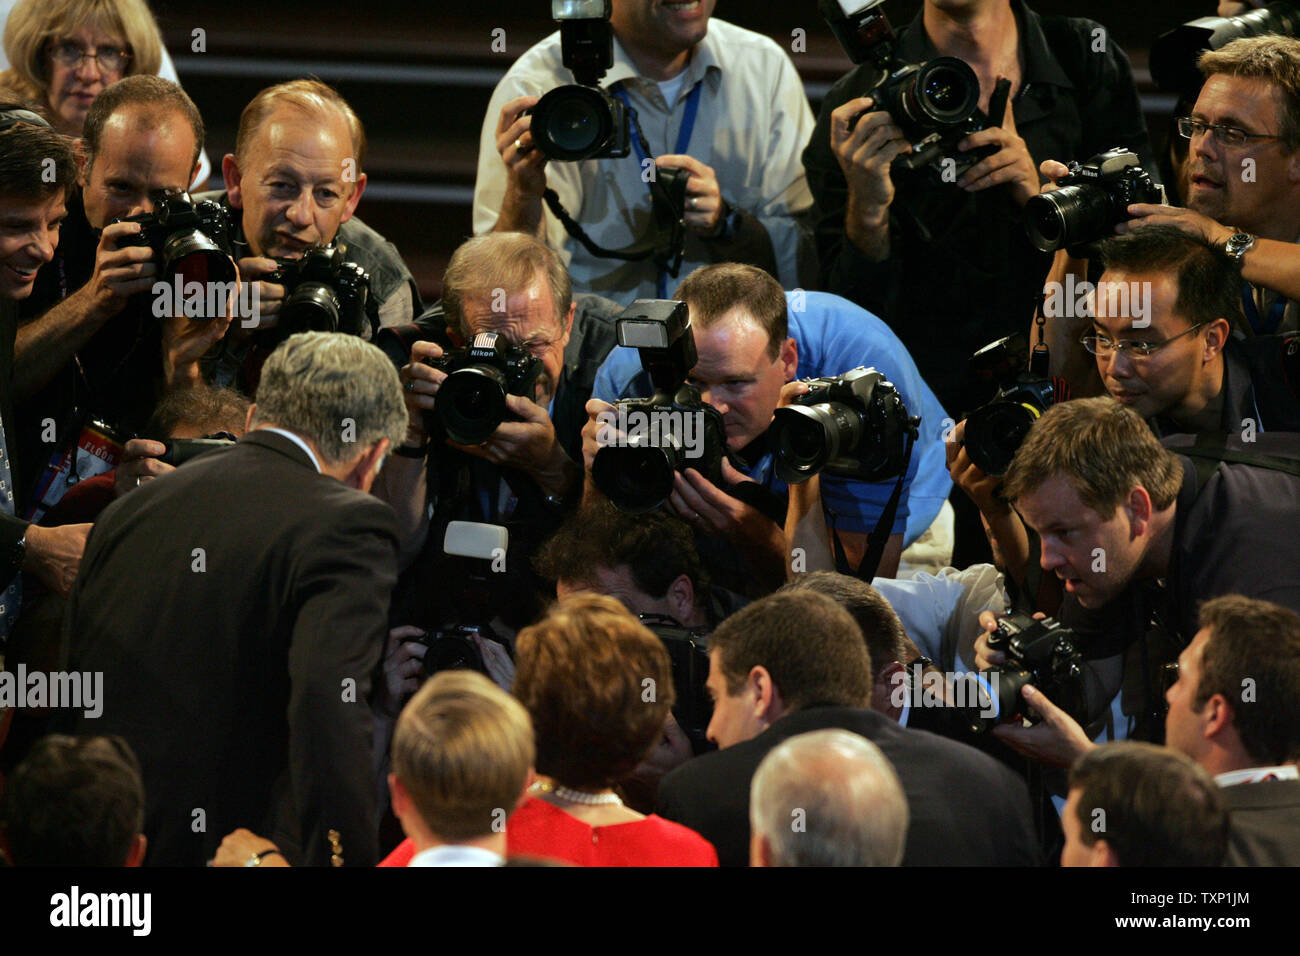 Photographers take pictures of former Mass. Gov. Michael Dukakis, left, and his wife Kitty, in the red dress, at the Democratic National Convention at the FleetCenter in Boston on July 28, 2004.  (UPI Photo/Terry Schmitt) Stock Photo